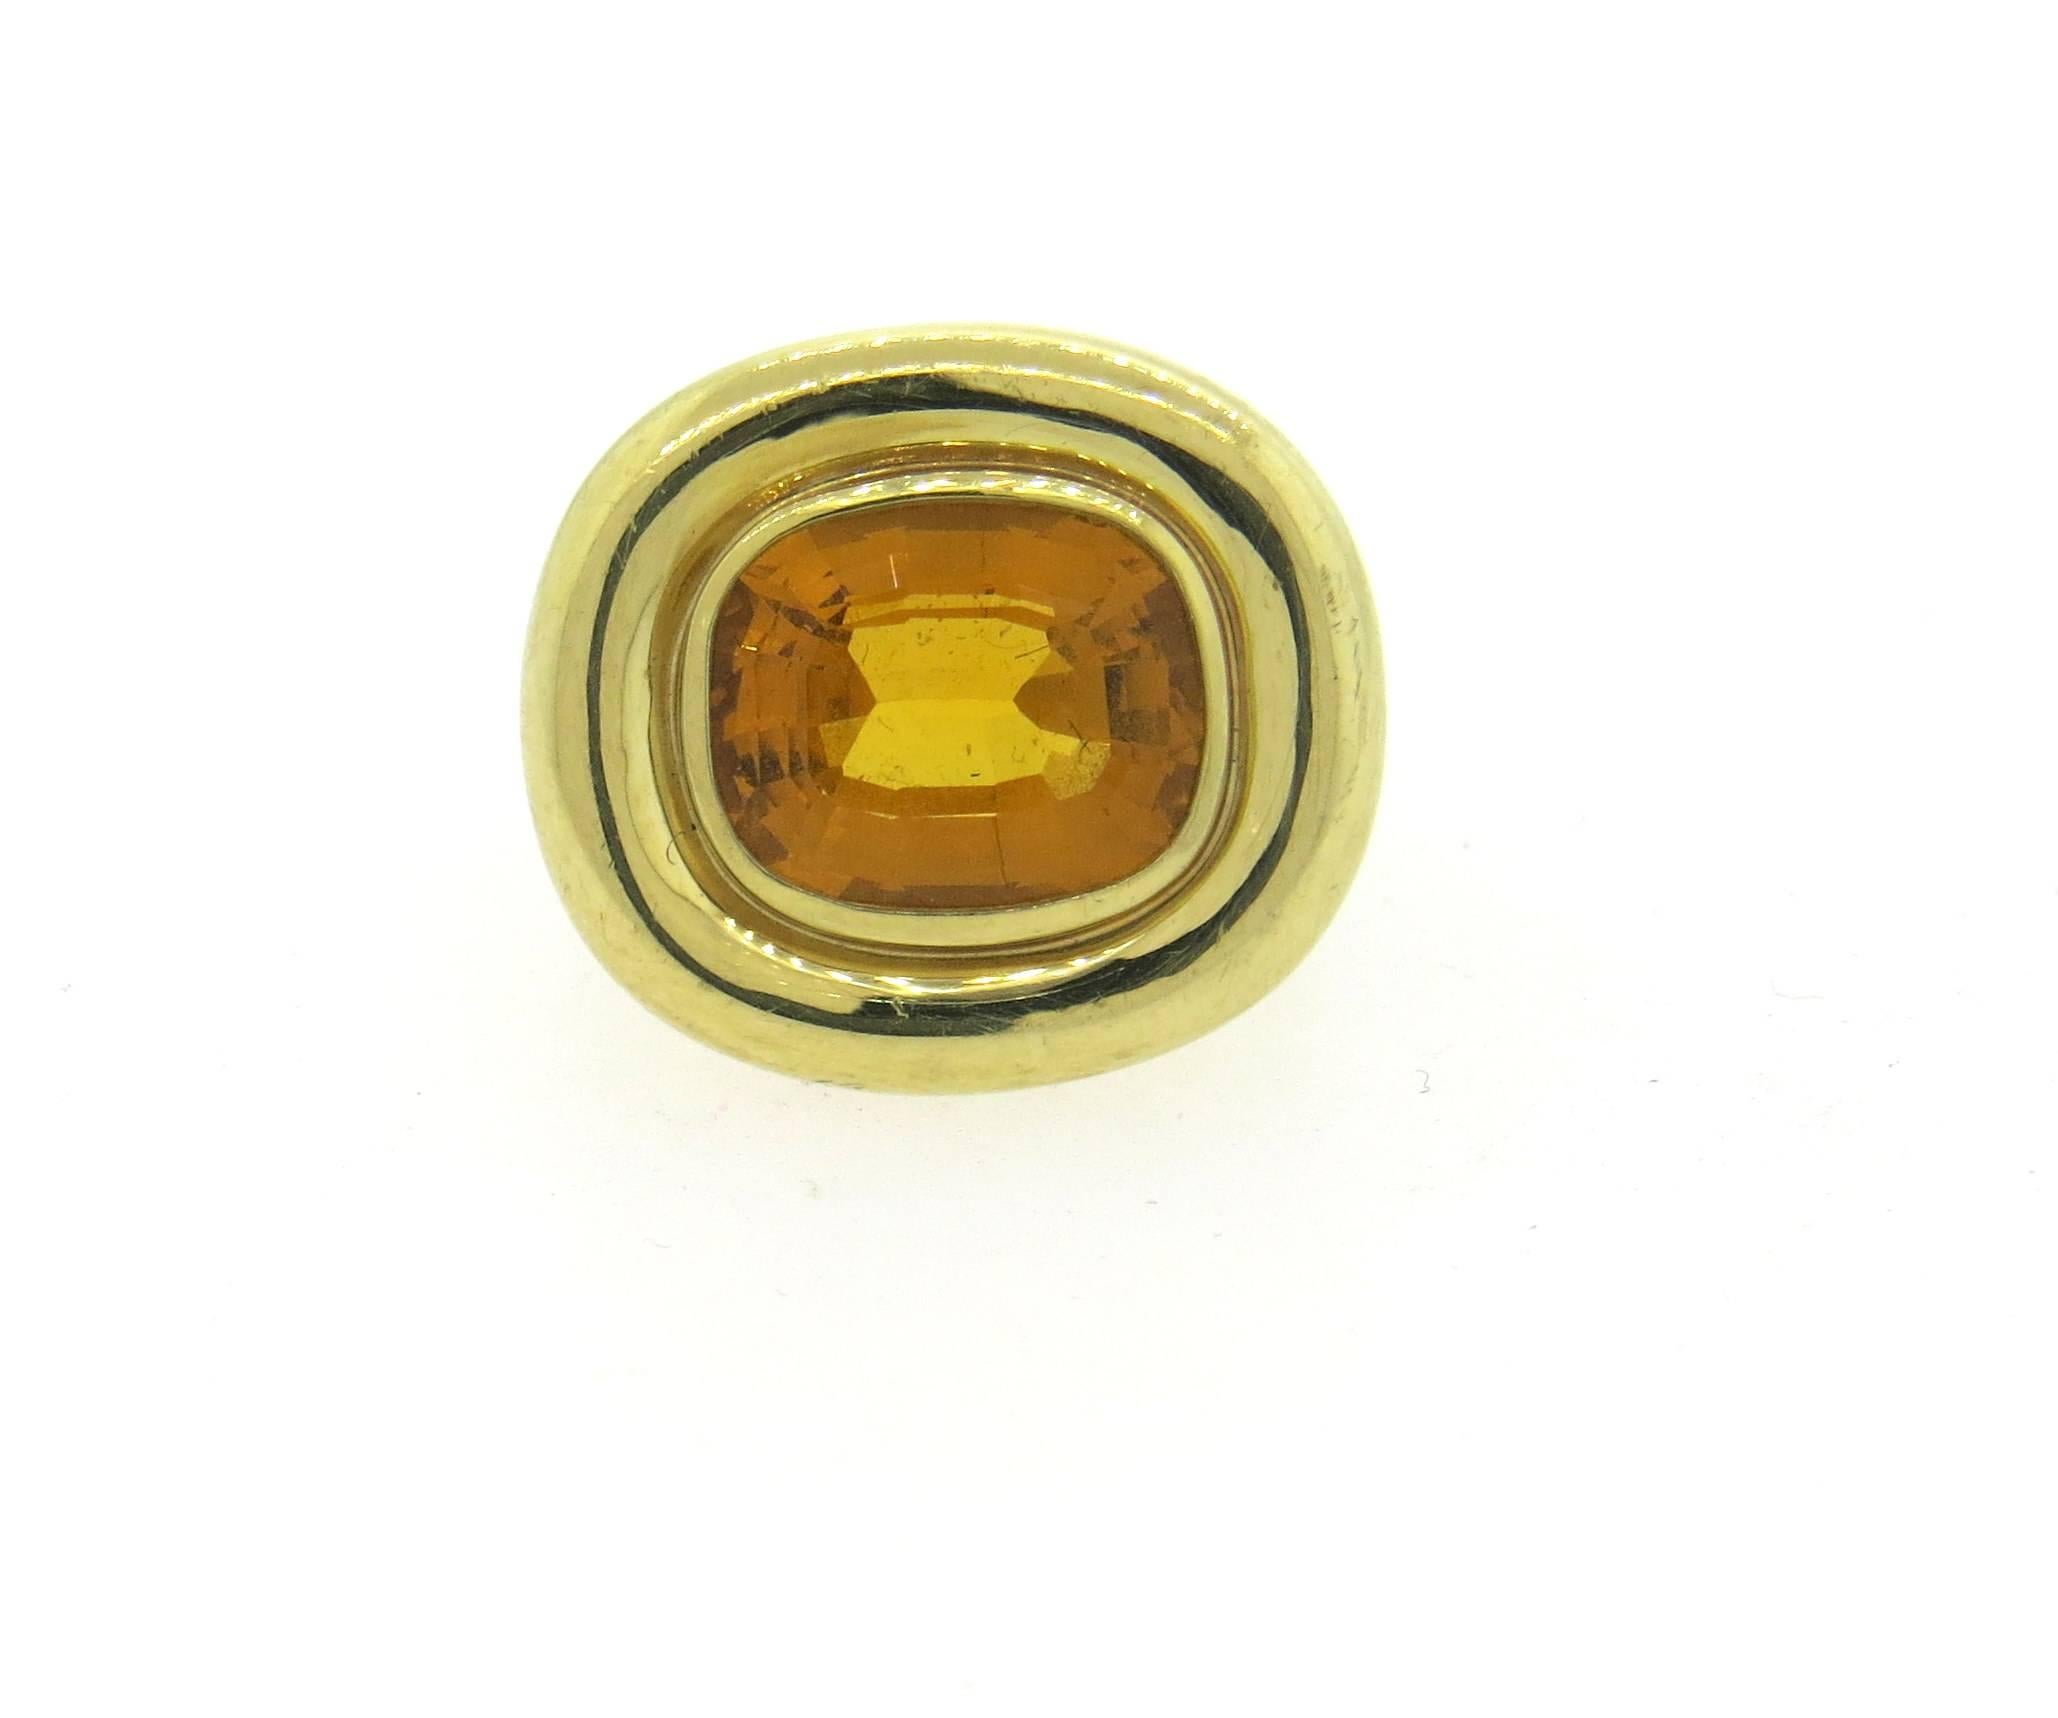 An 18k yellow gold ring, crafted by Paloma Picasso for Tiffany & Co, featuring approx. 4.5ct citrine. Ring size 5, ring top 18mm x 20mm . Marked: 1981, Paloma Picasso ,18k,Tiffany & Co. Weight of the piece - 15.8 grams